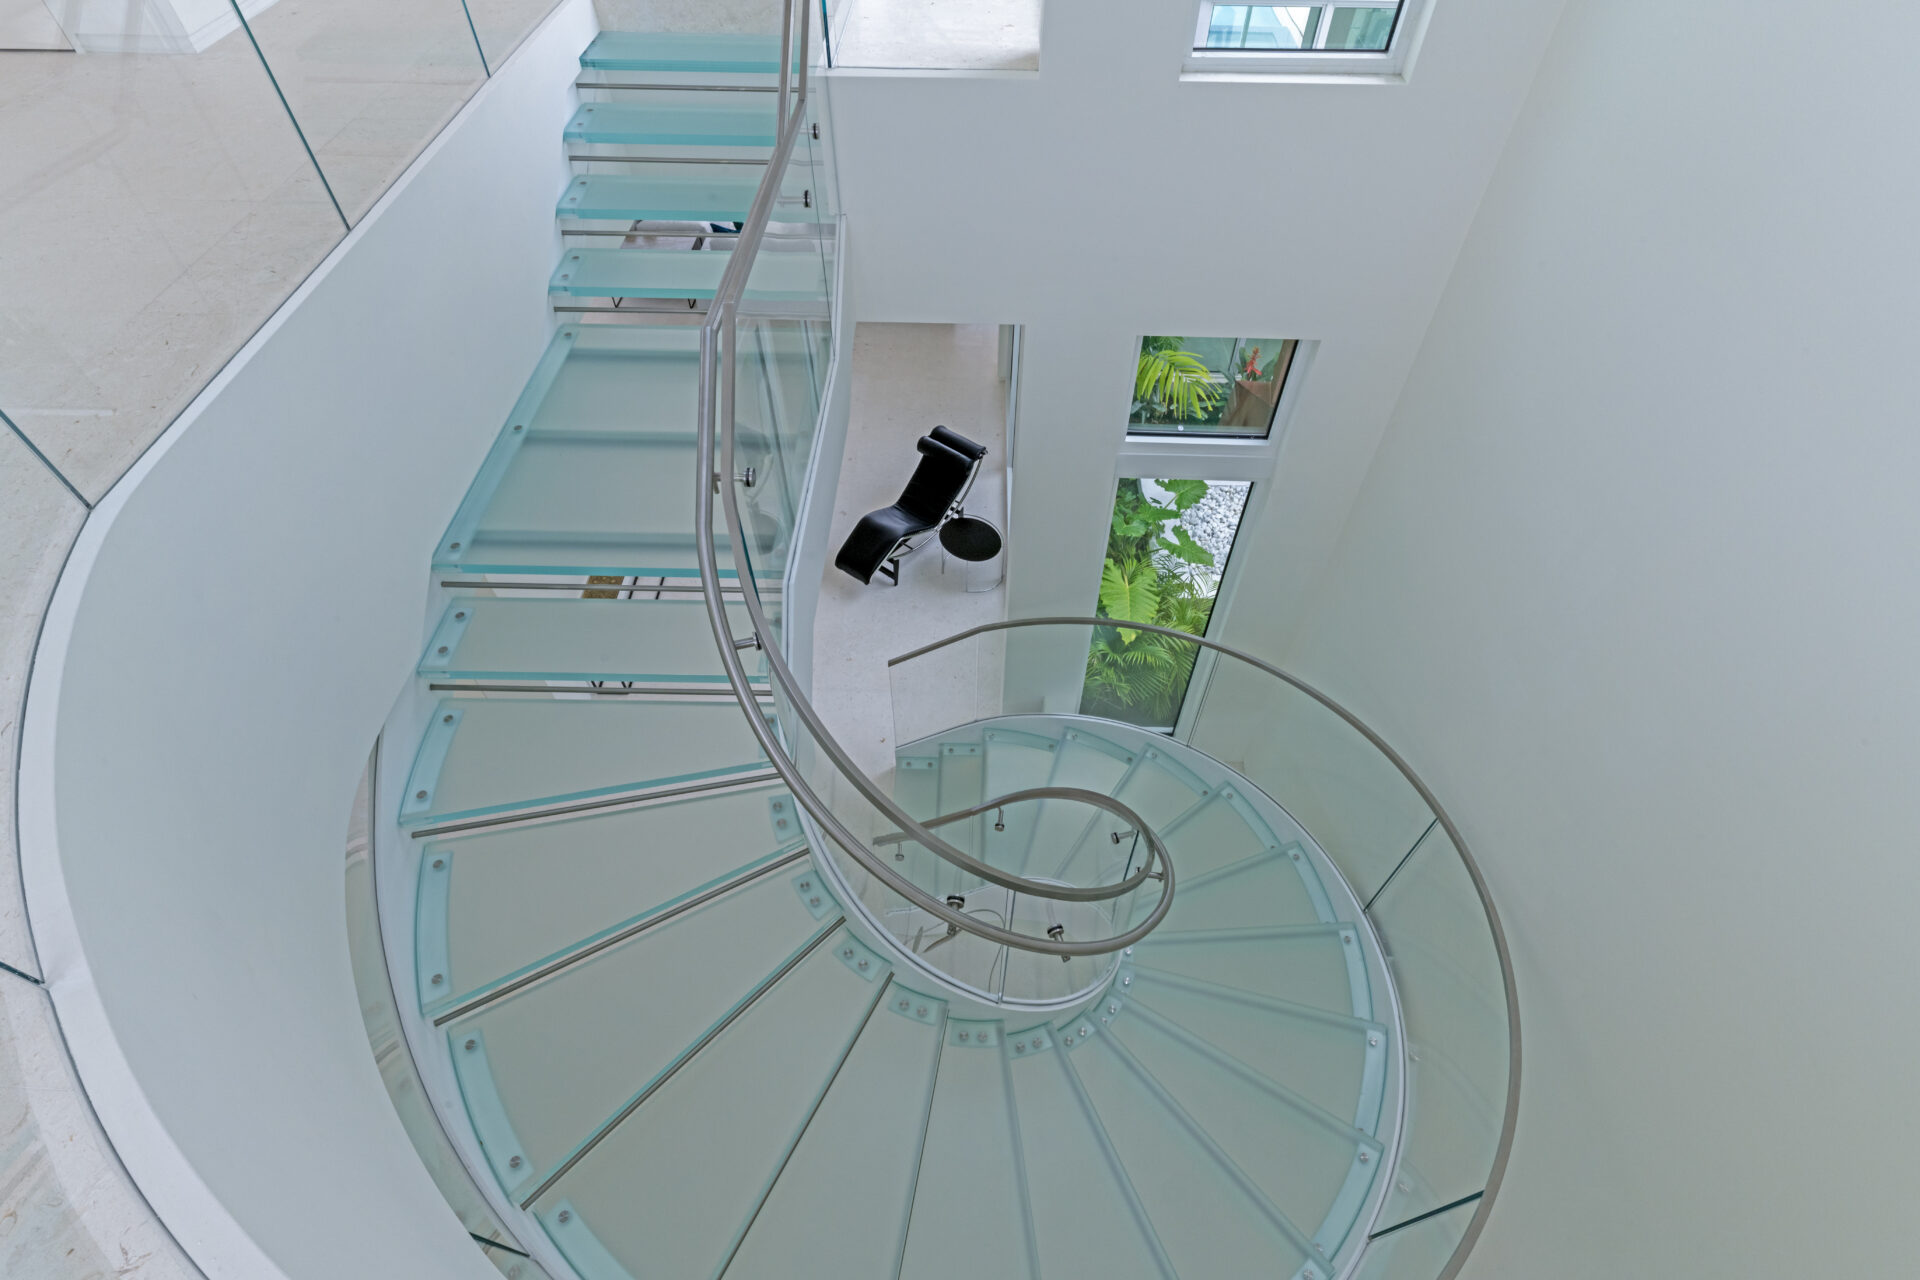 A spiral glass staircase